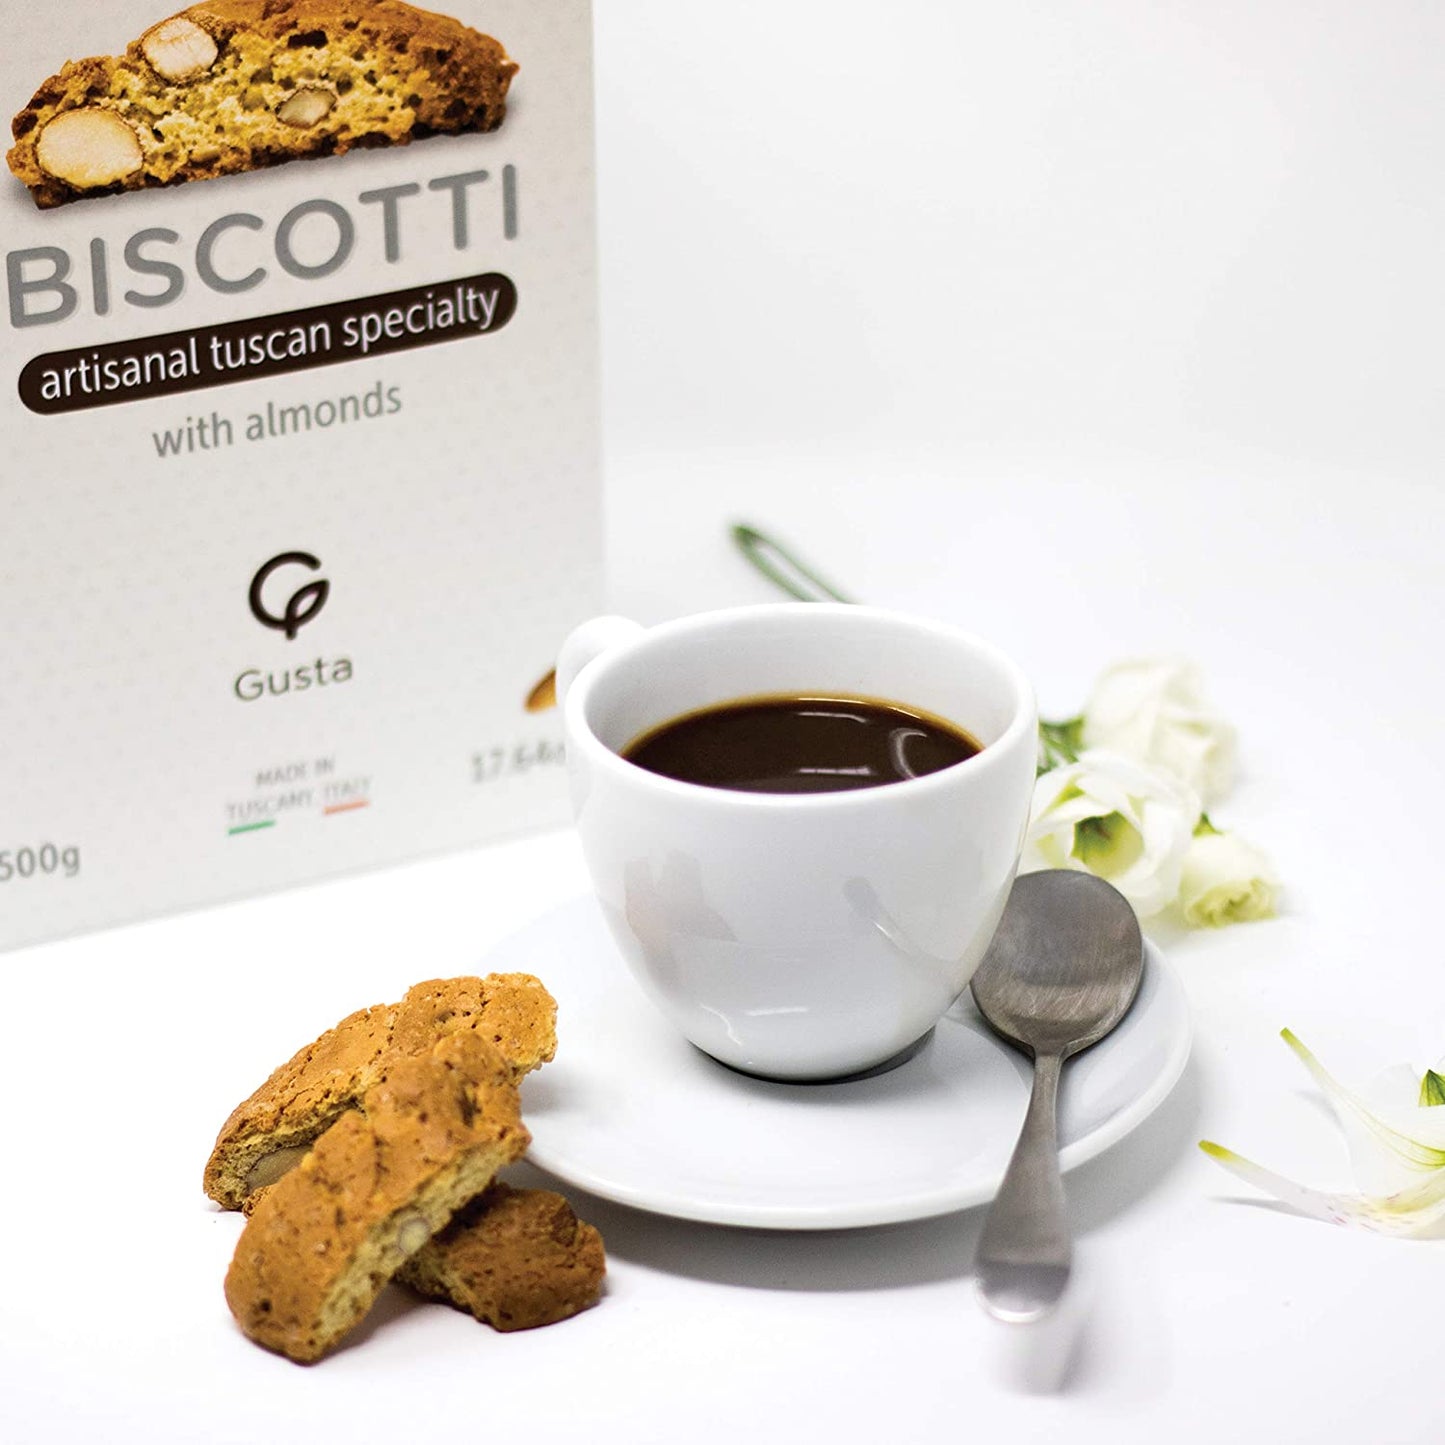 Gusta Authentic Biscotti Cookies Made in Tuscany, Italy - Orange